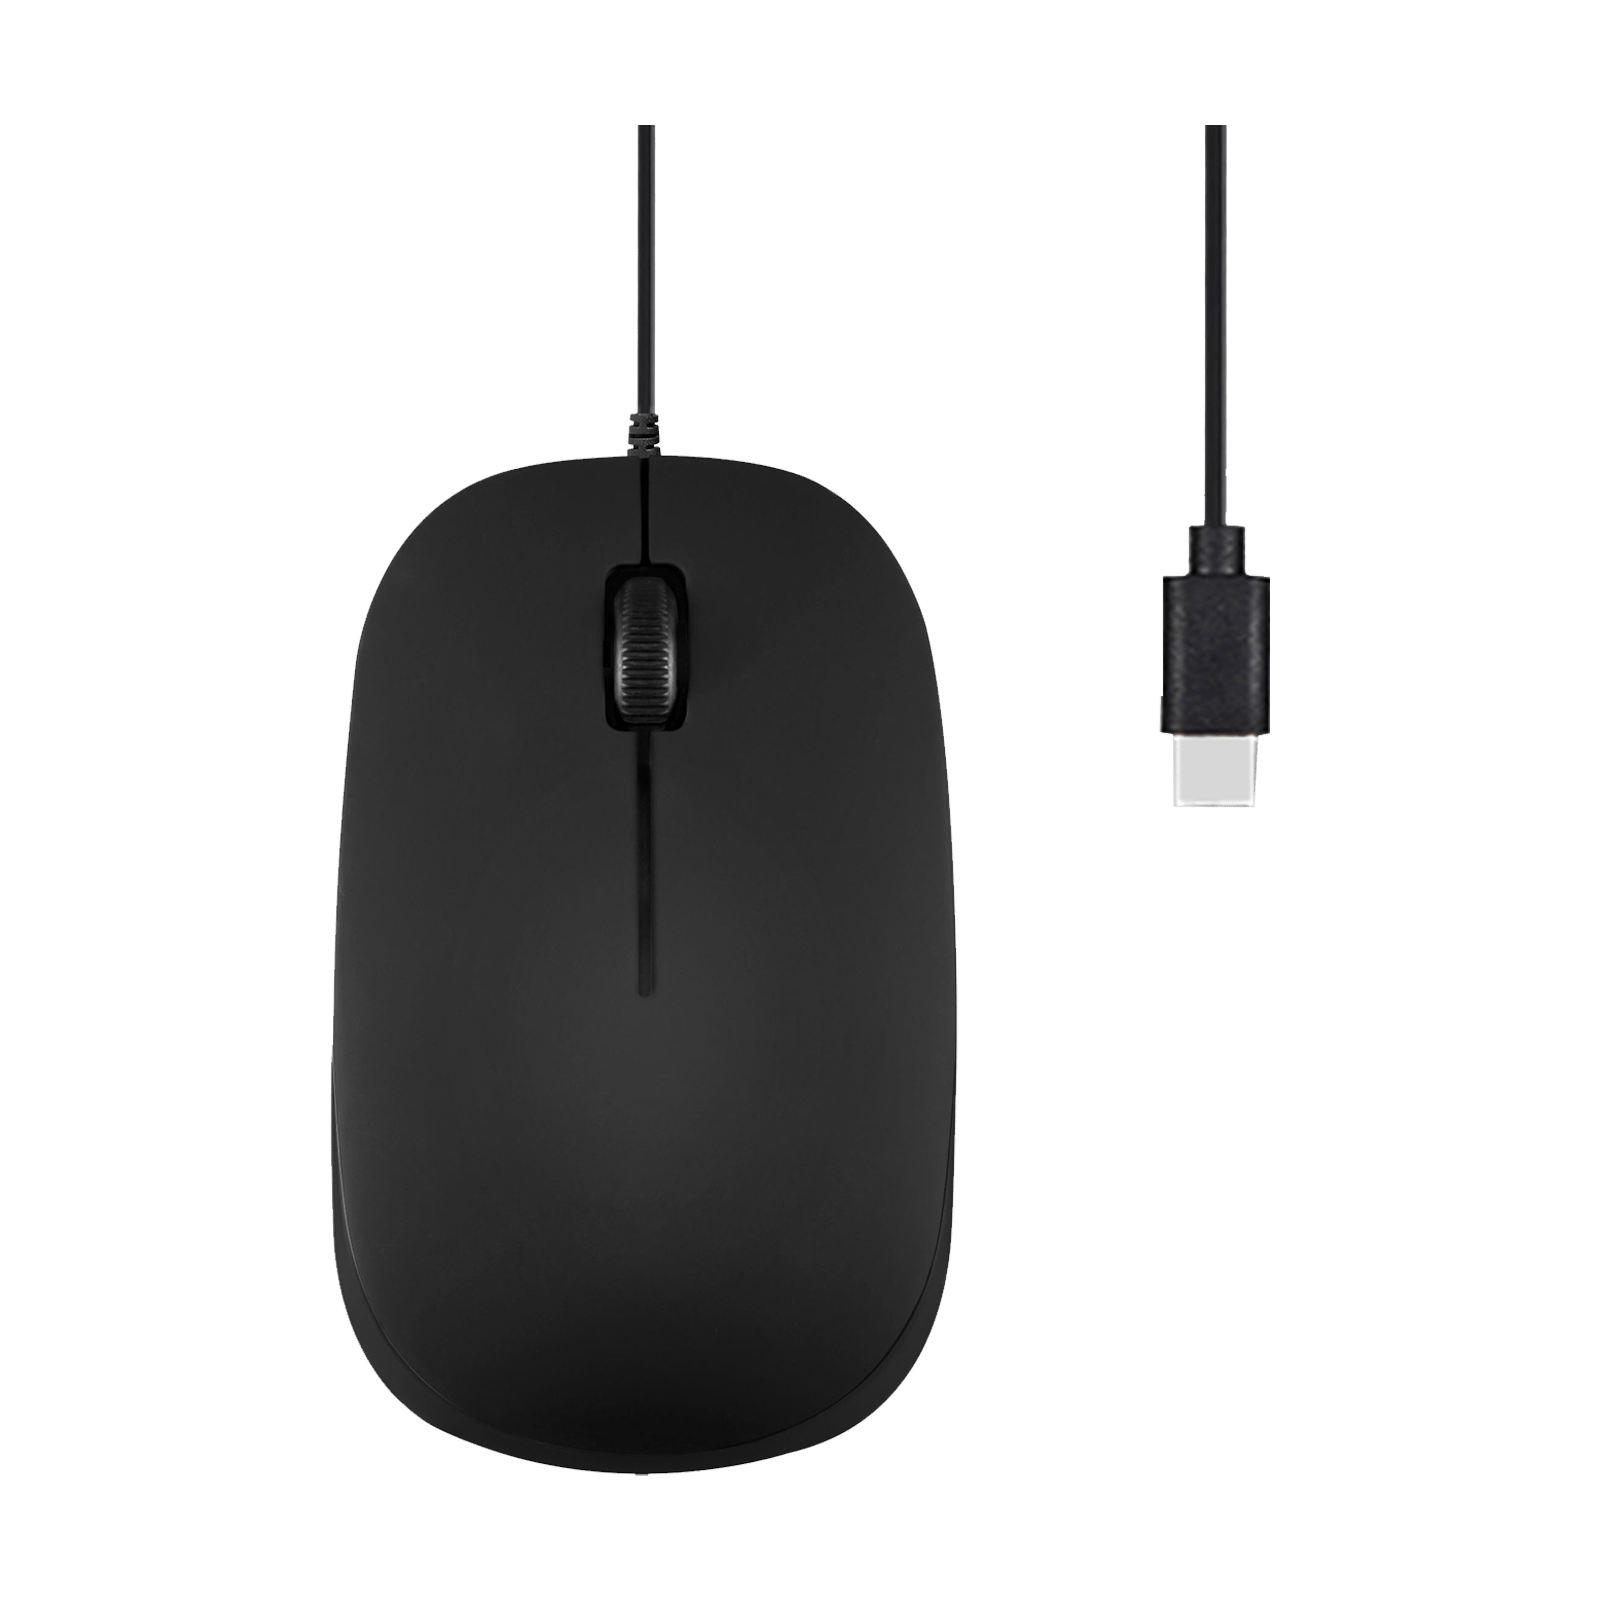 PERIMICE-201 C - Wired Mouse ONLY for USB-C - Perixx Europe